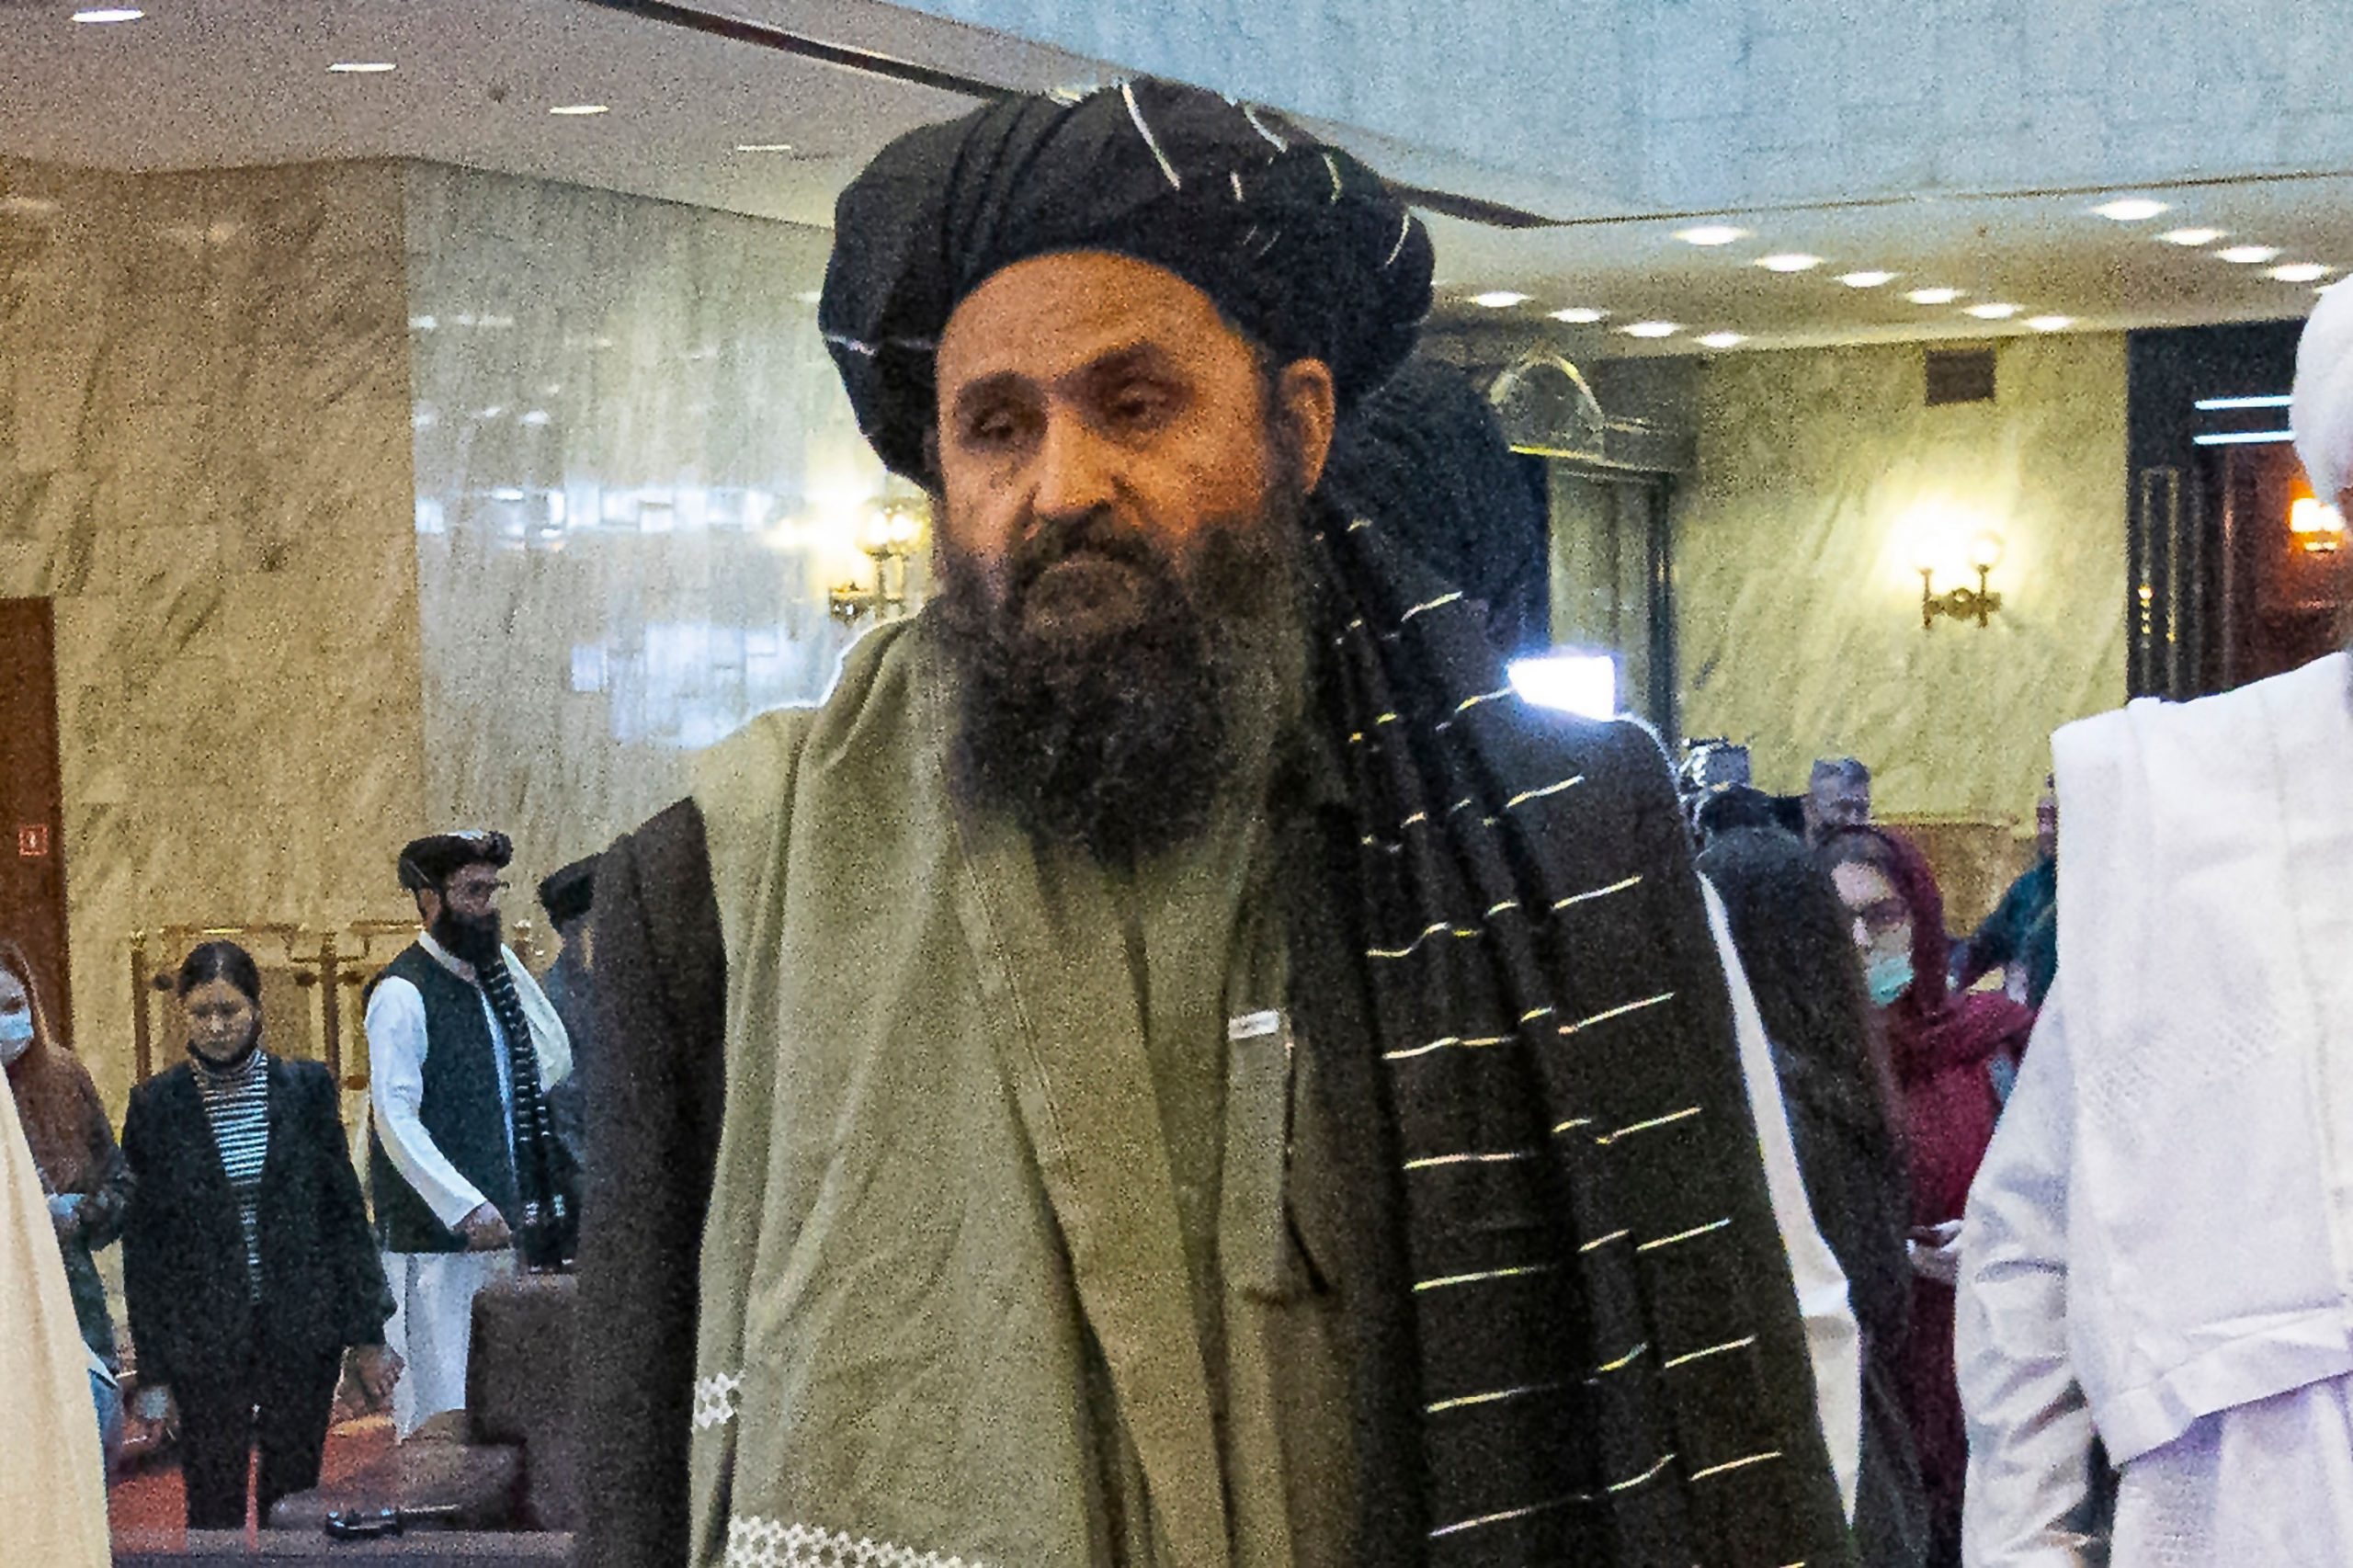 Taliban says their Deputy PM Mullah Baradar is alive, after reports of his death